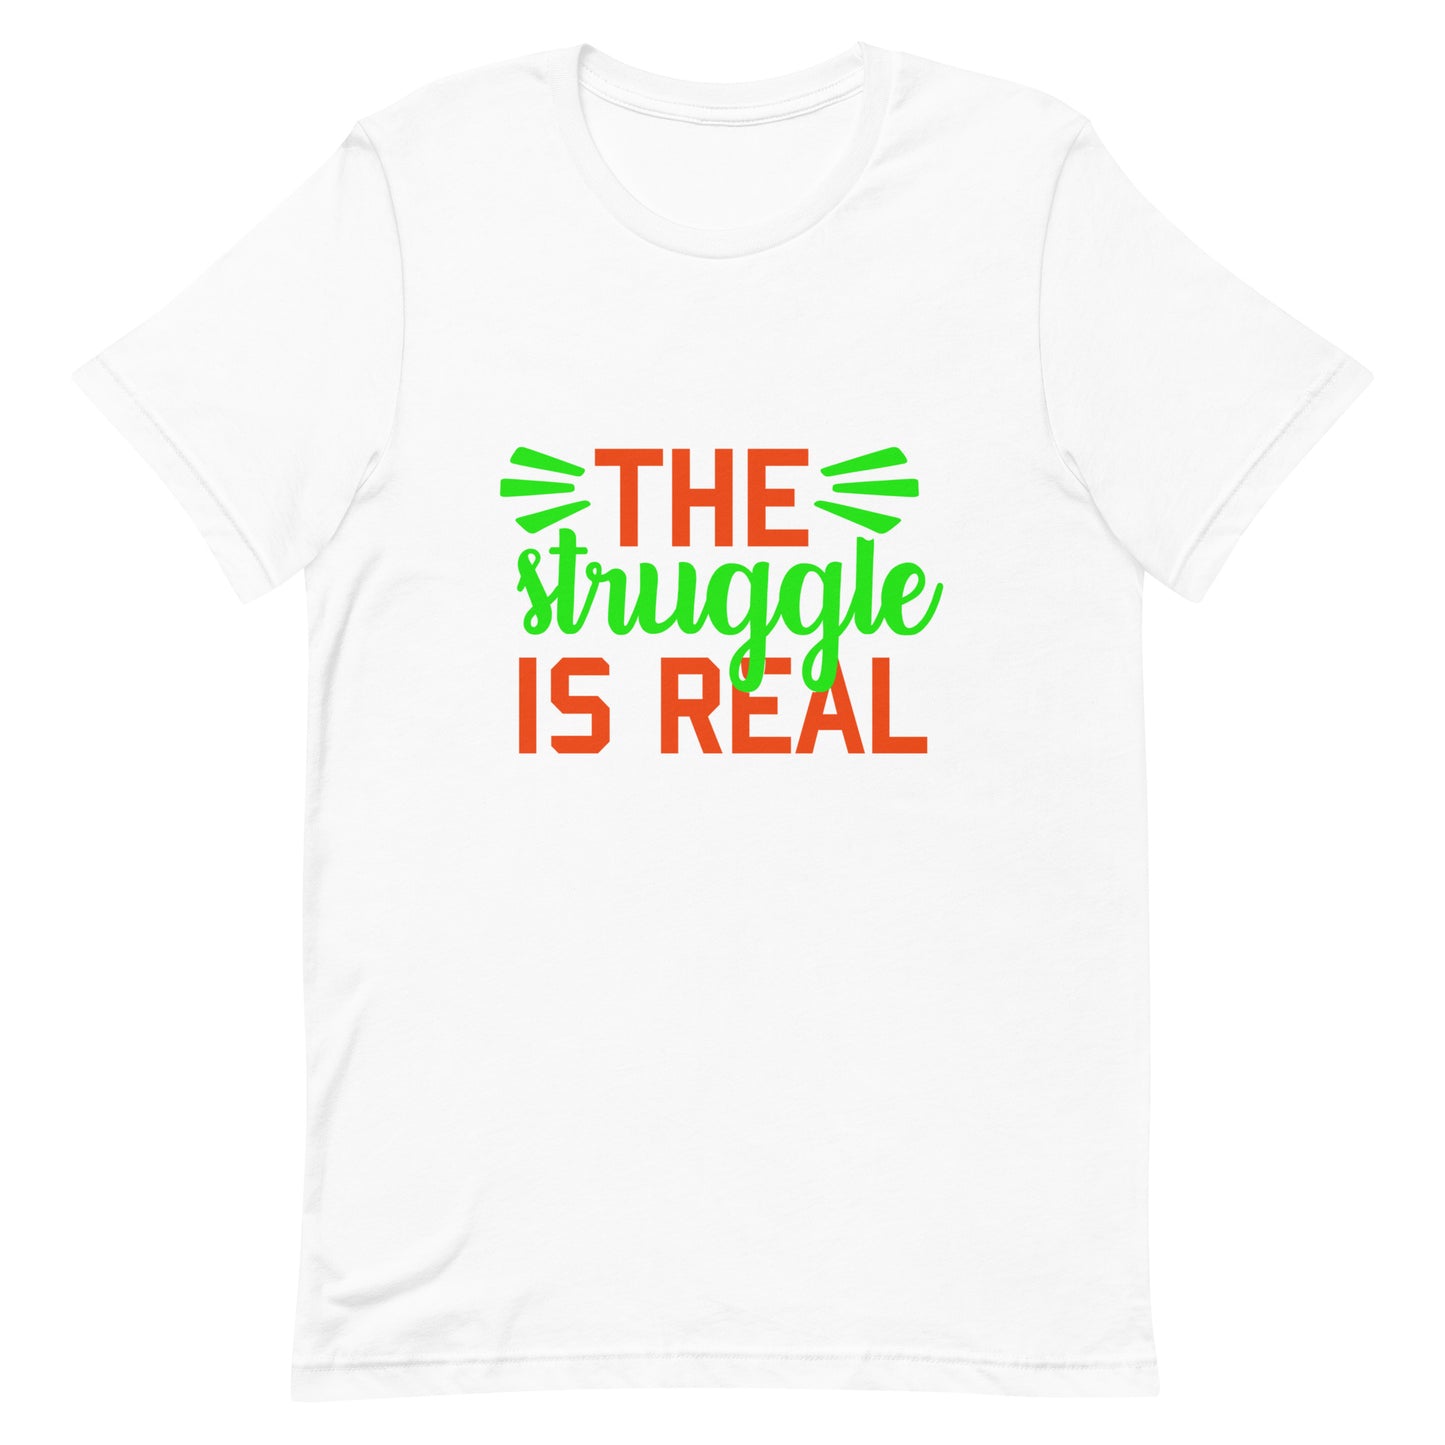 The Struggle is Real Unisex t-shirt